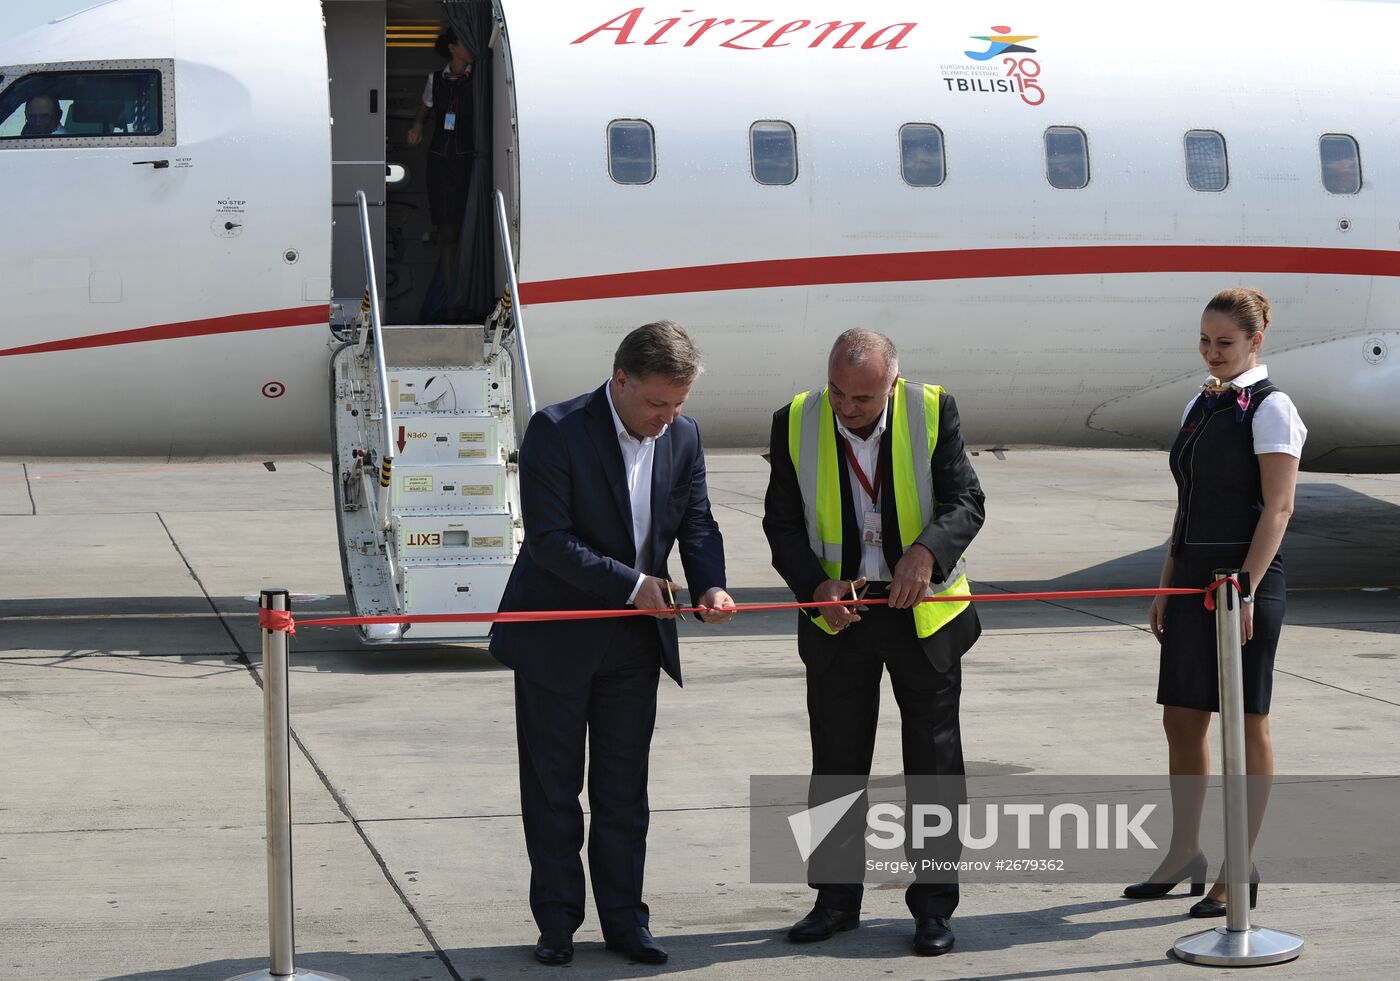 Welcome ceremony for the first GeorgianAirways flight in Rostov-on-Don